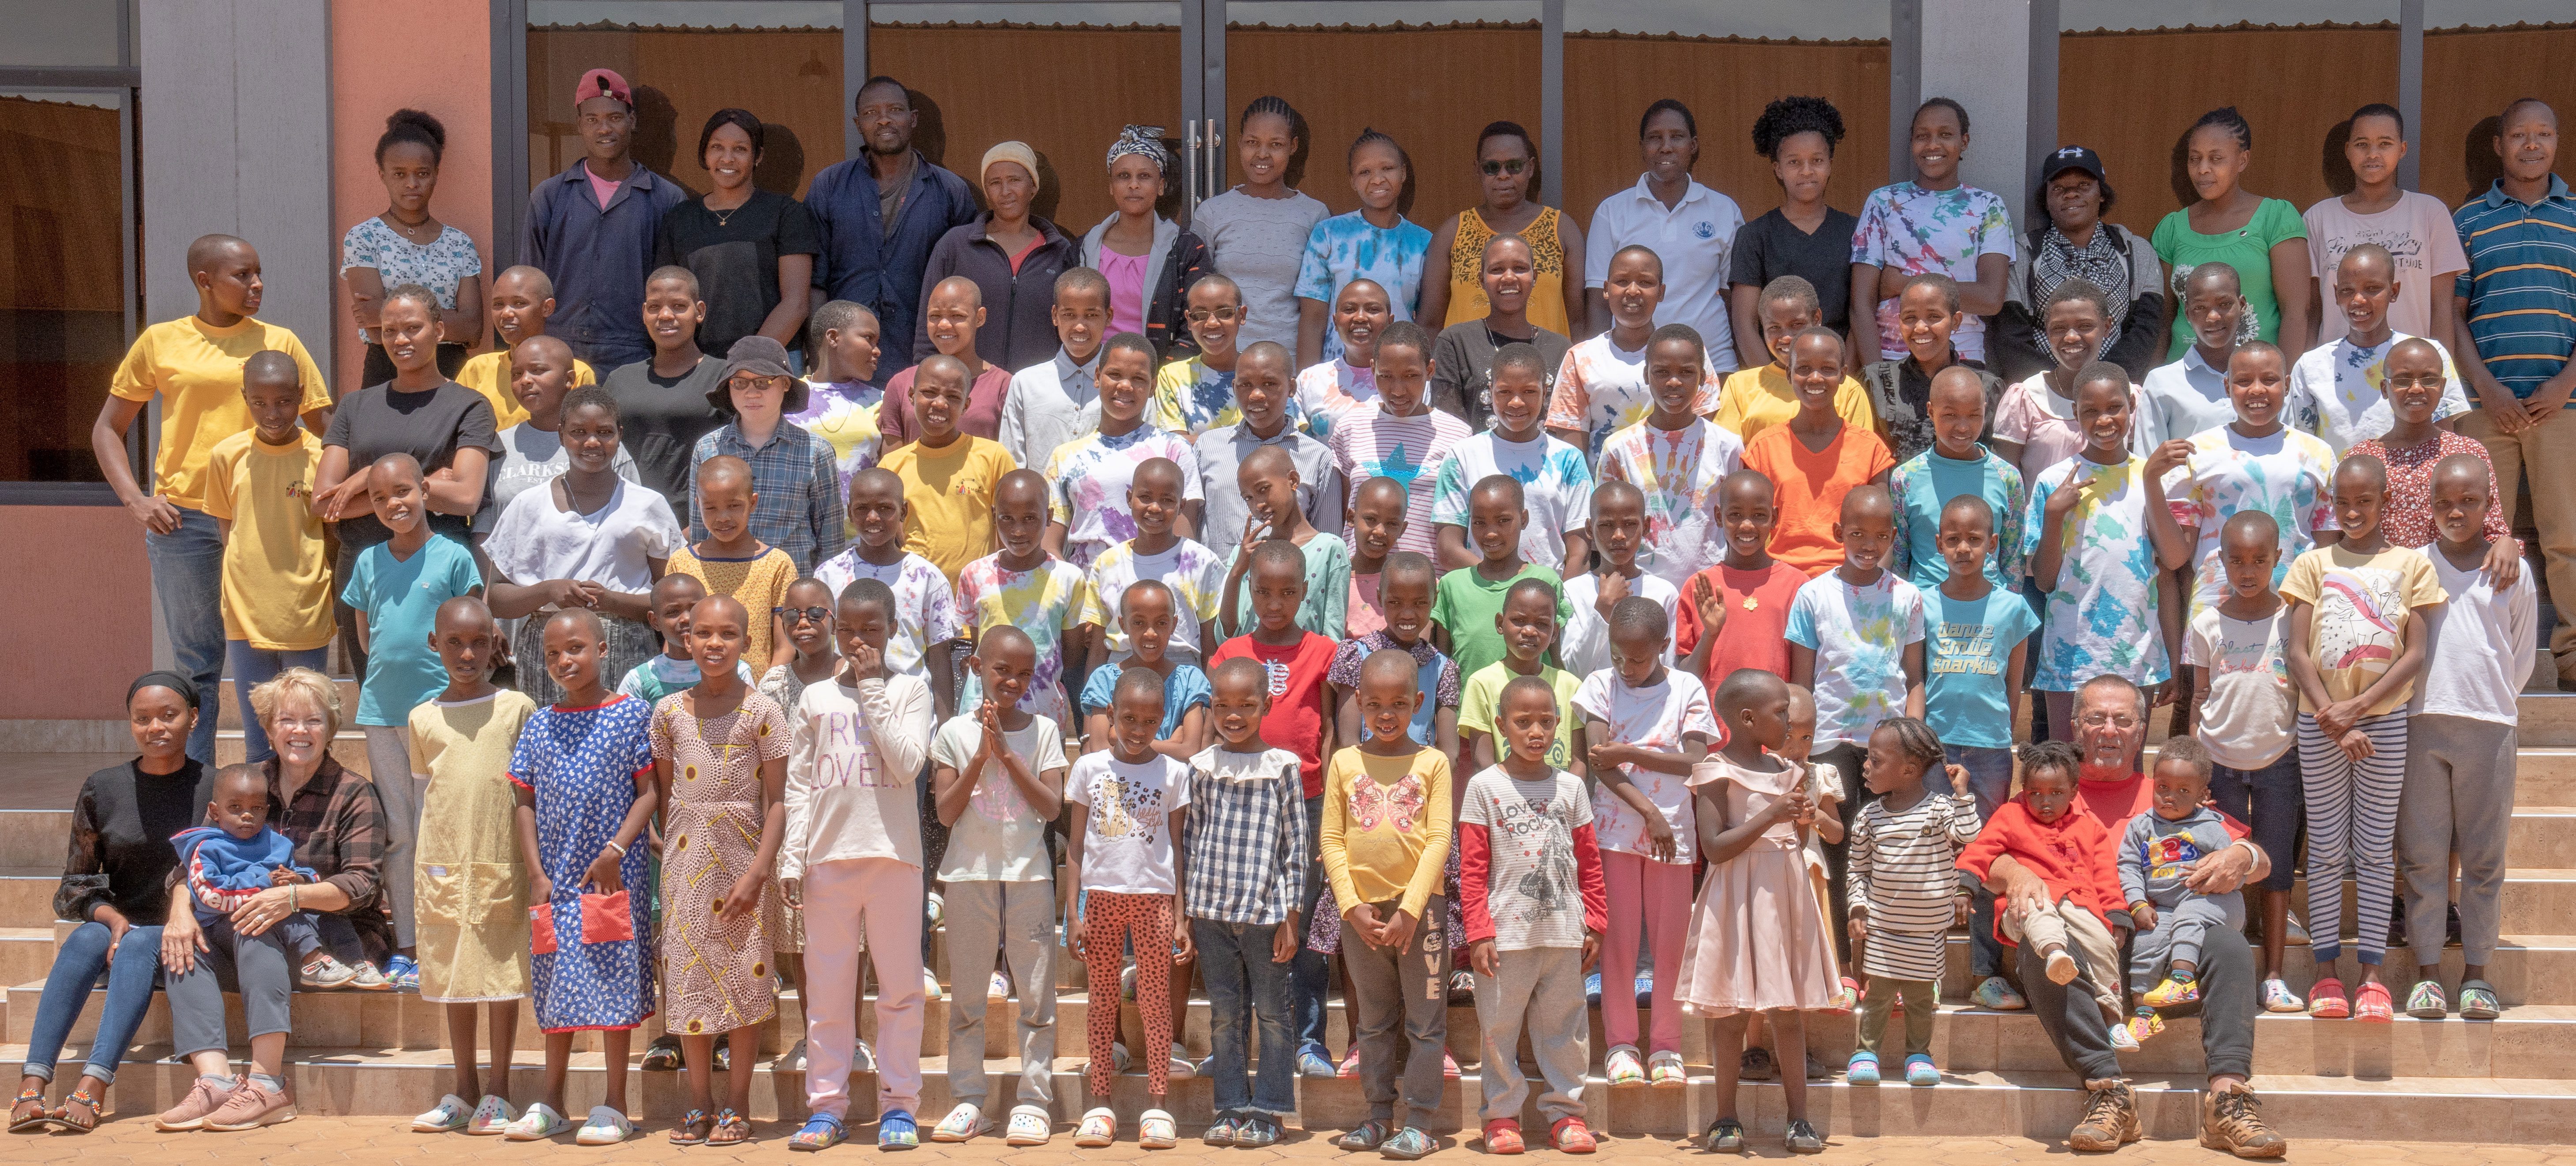 A group picture of all the residents of Maasai Girls Rescue Center, an African Charity, in Tanzania